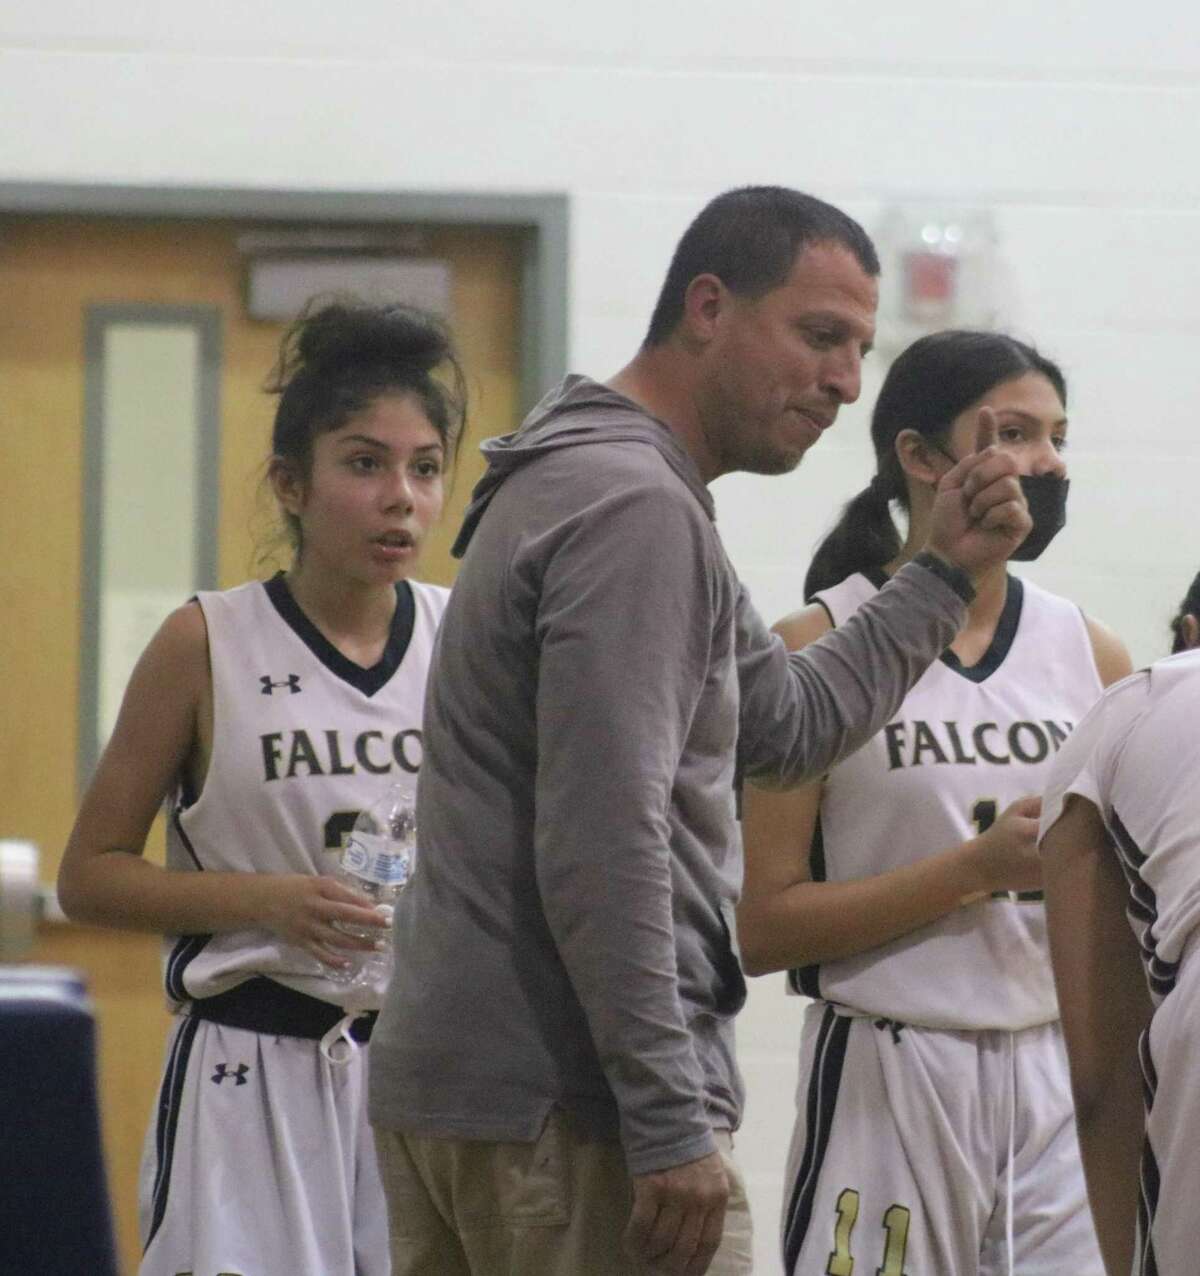 Miller 8A coach Chris Roque gives his players a breather during a timeout in the championship game with Bondy. The Lady Falcons had a very strong season, going undefeated until Tuesday night's finale.